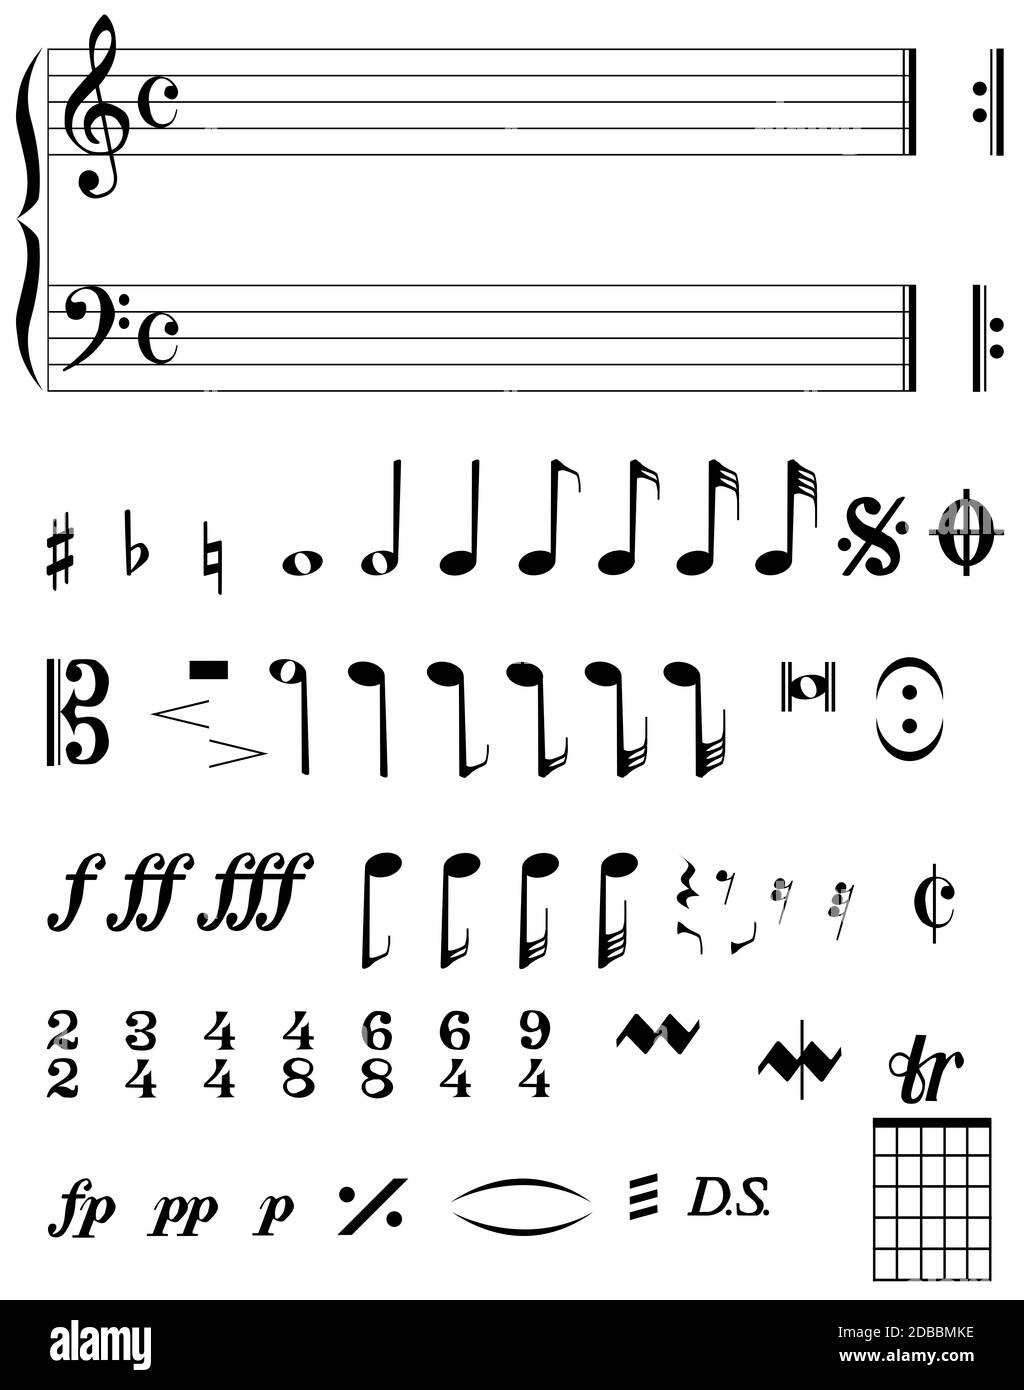 A selection of musical notes and symbols. Stock Photo